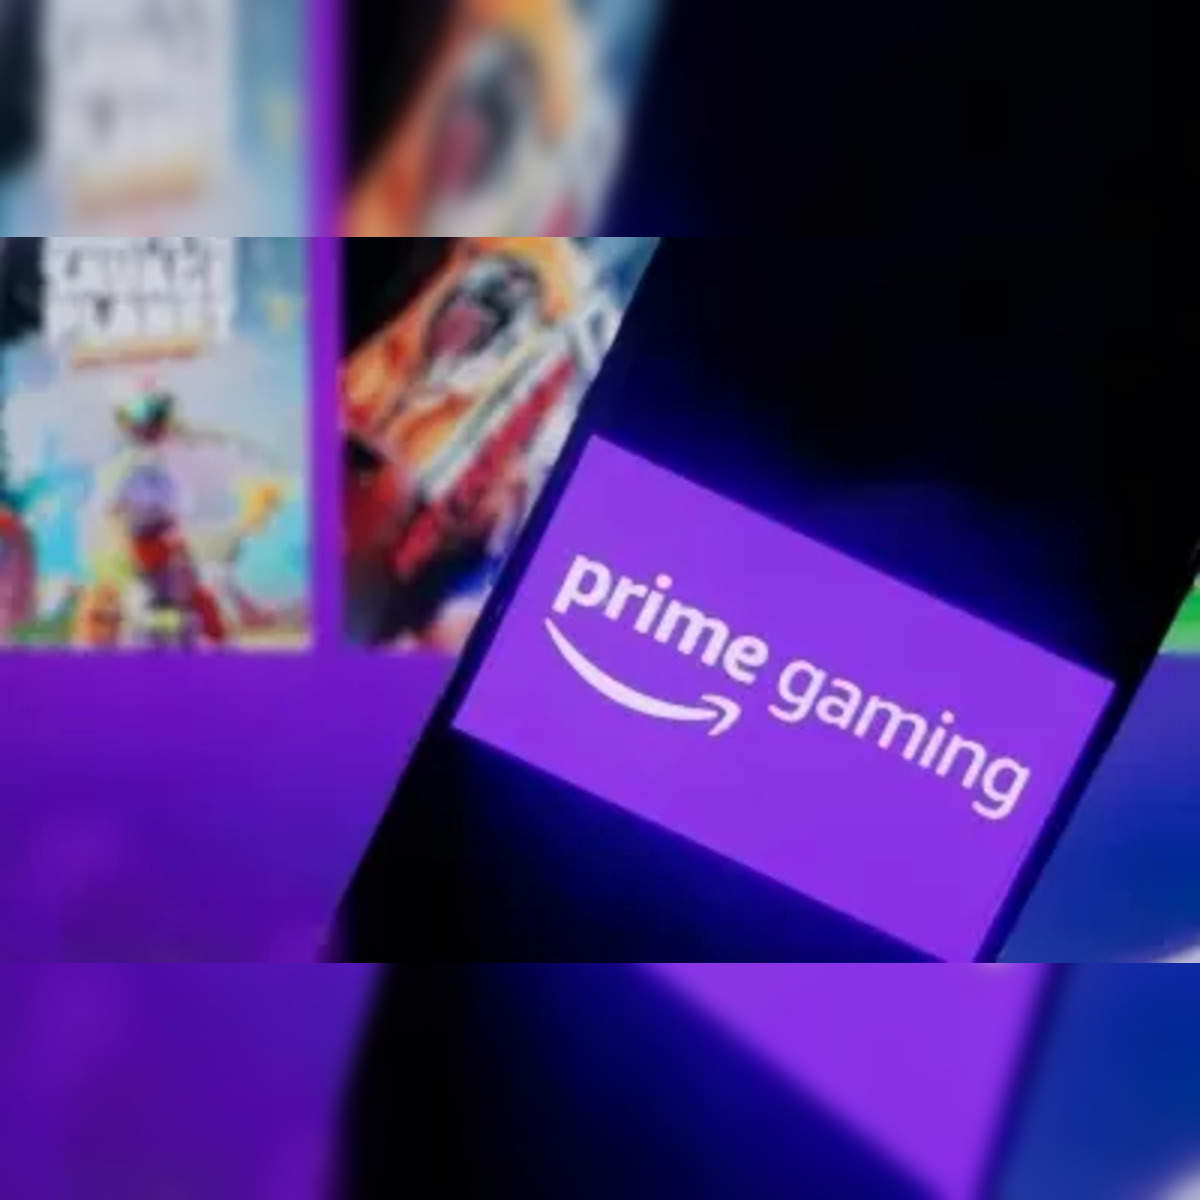 Prime Gaming launched in India with free PC games and in-game